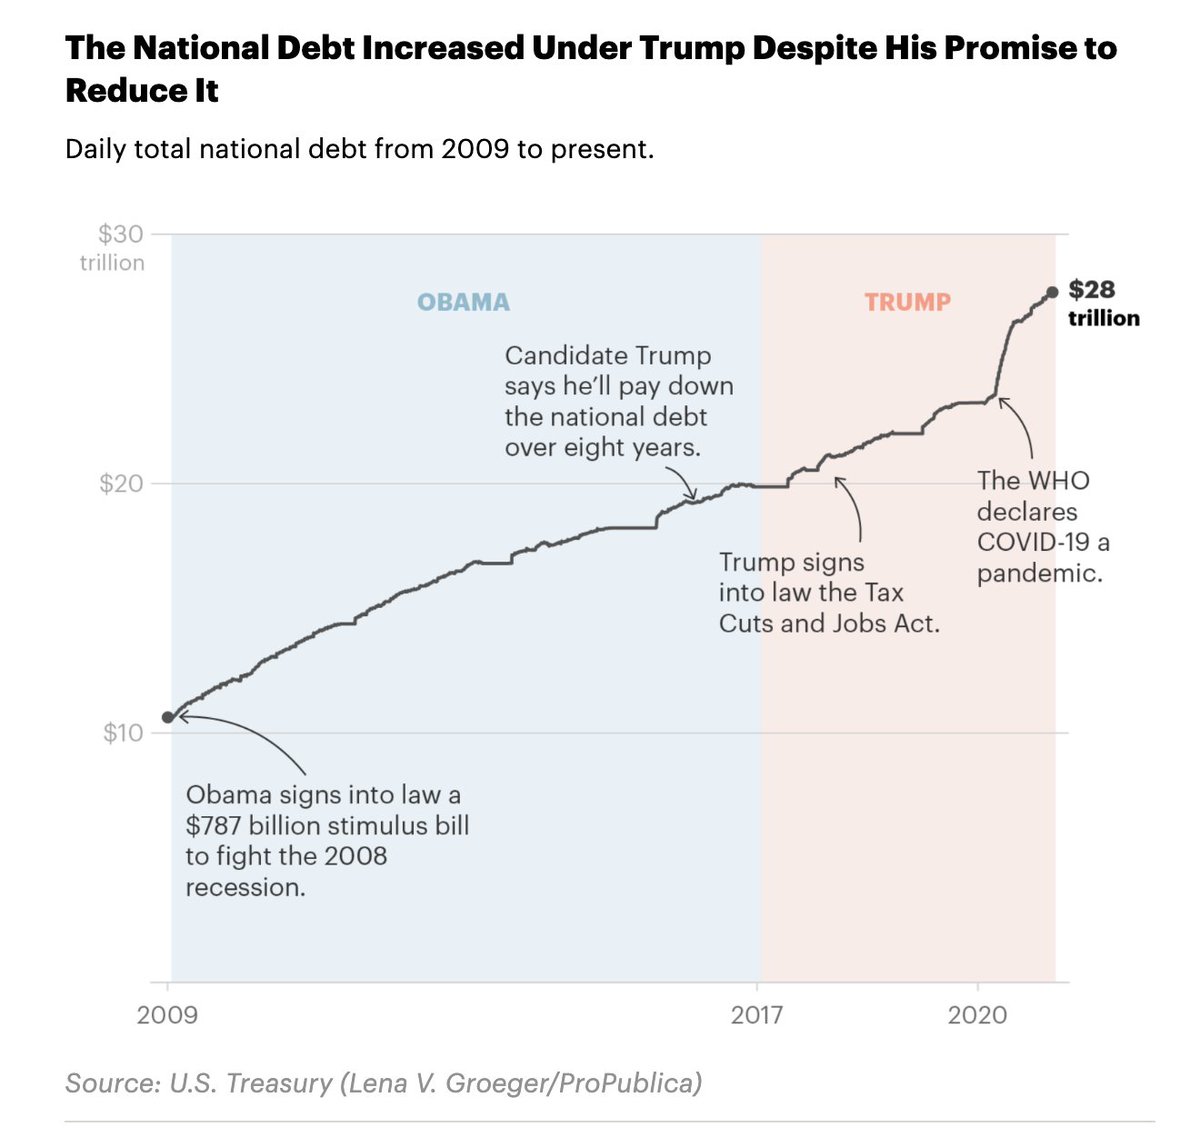 Donald Trump promised he'd reduce the national debt. It may shock you to learn that he lied. propublica.org/article/nation…